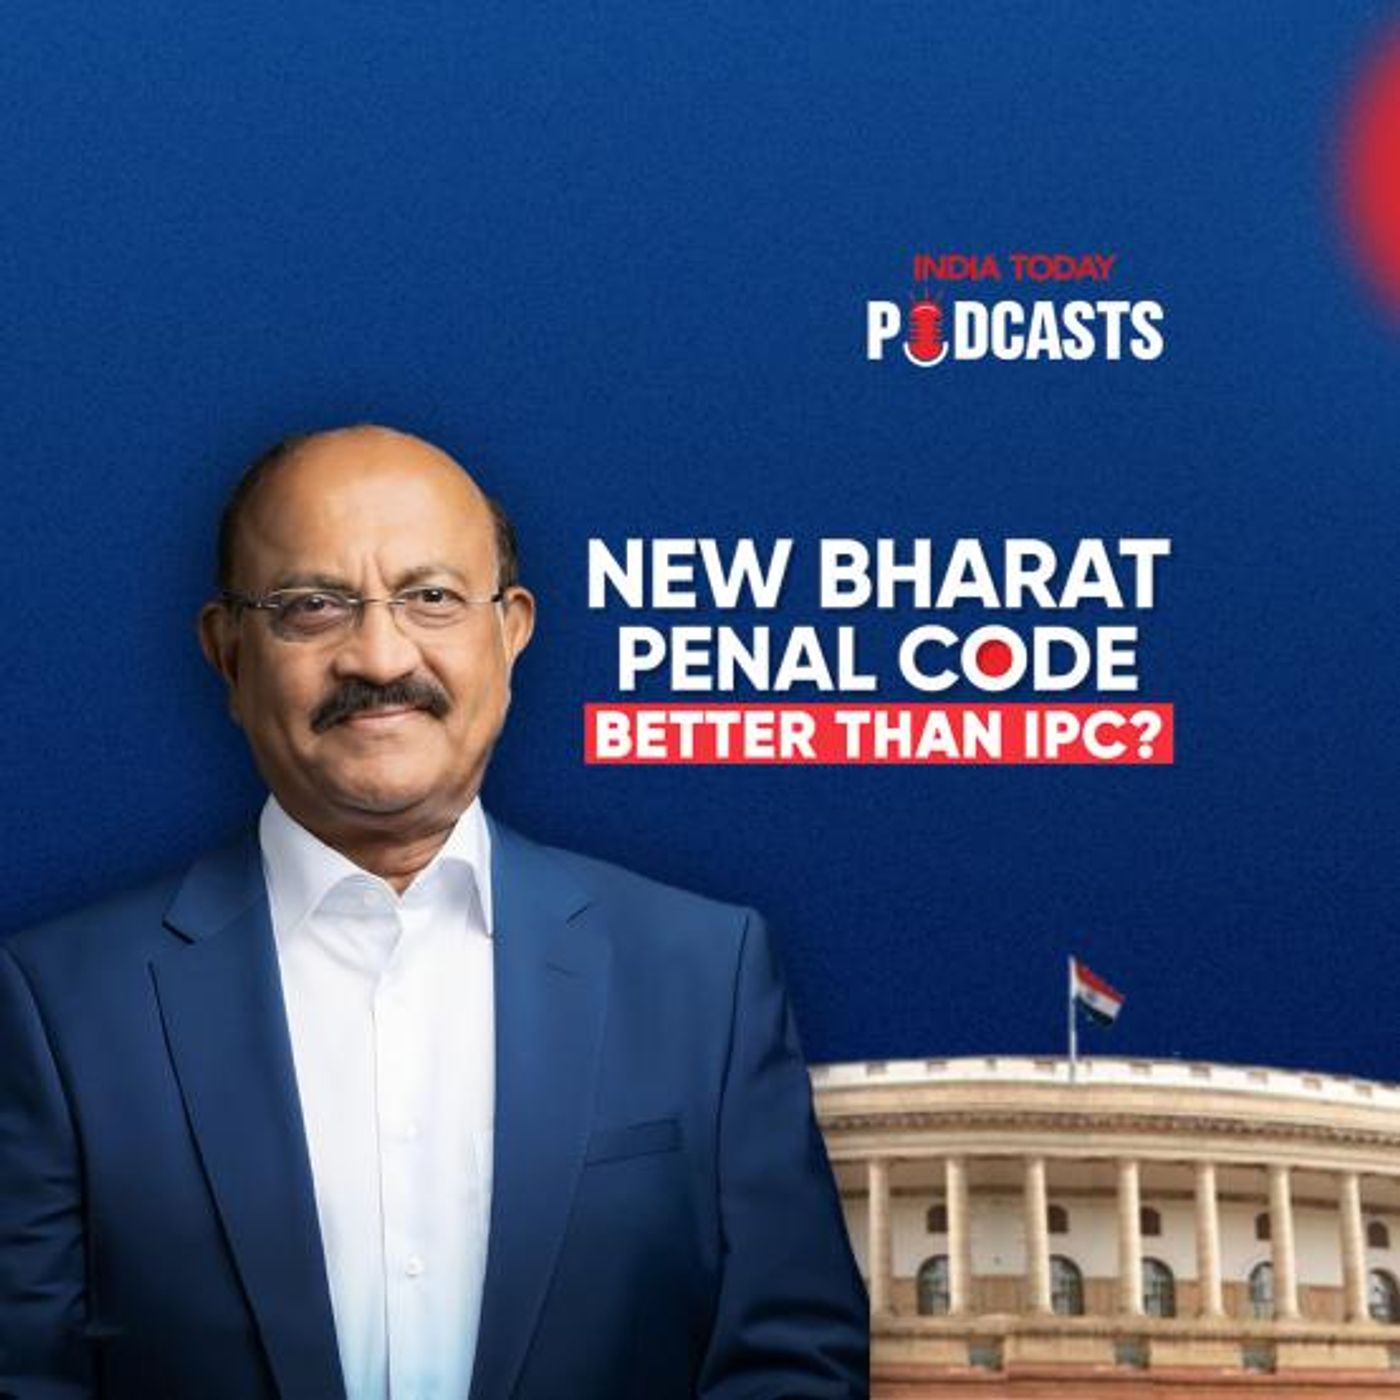 New Bharat Penal Code Better Than IPC? | Nothing But The Truth, S2, Ep 19